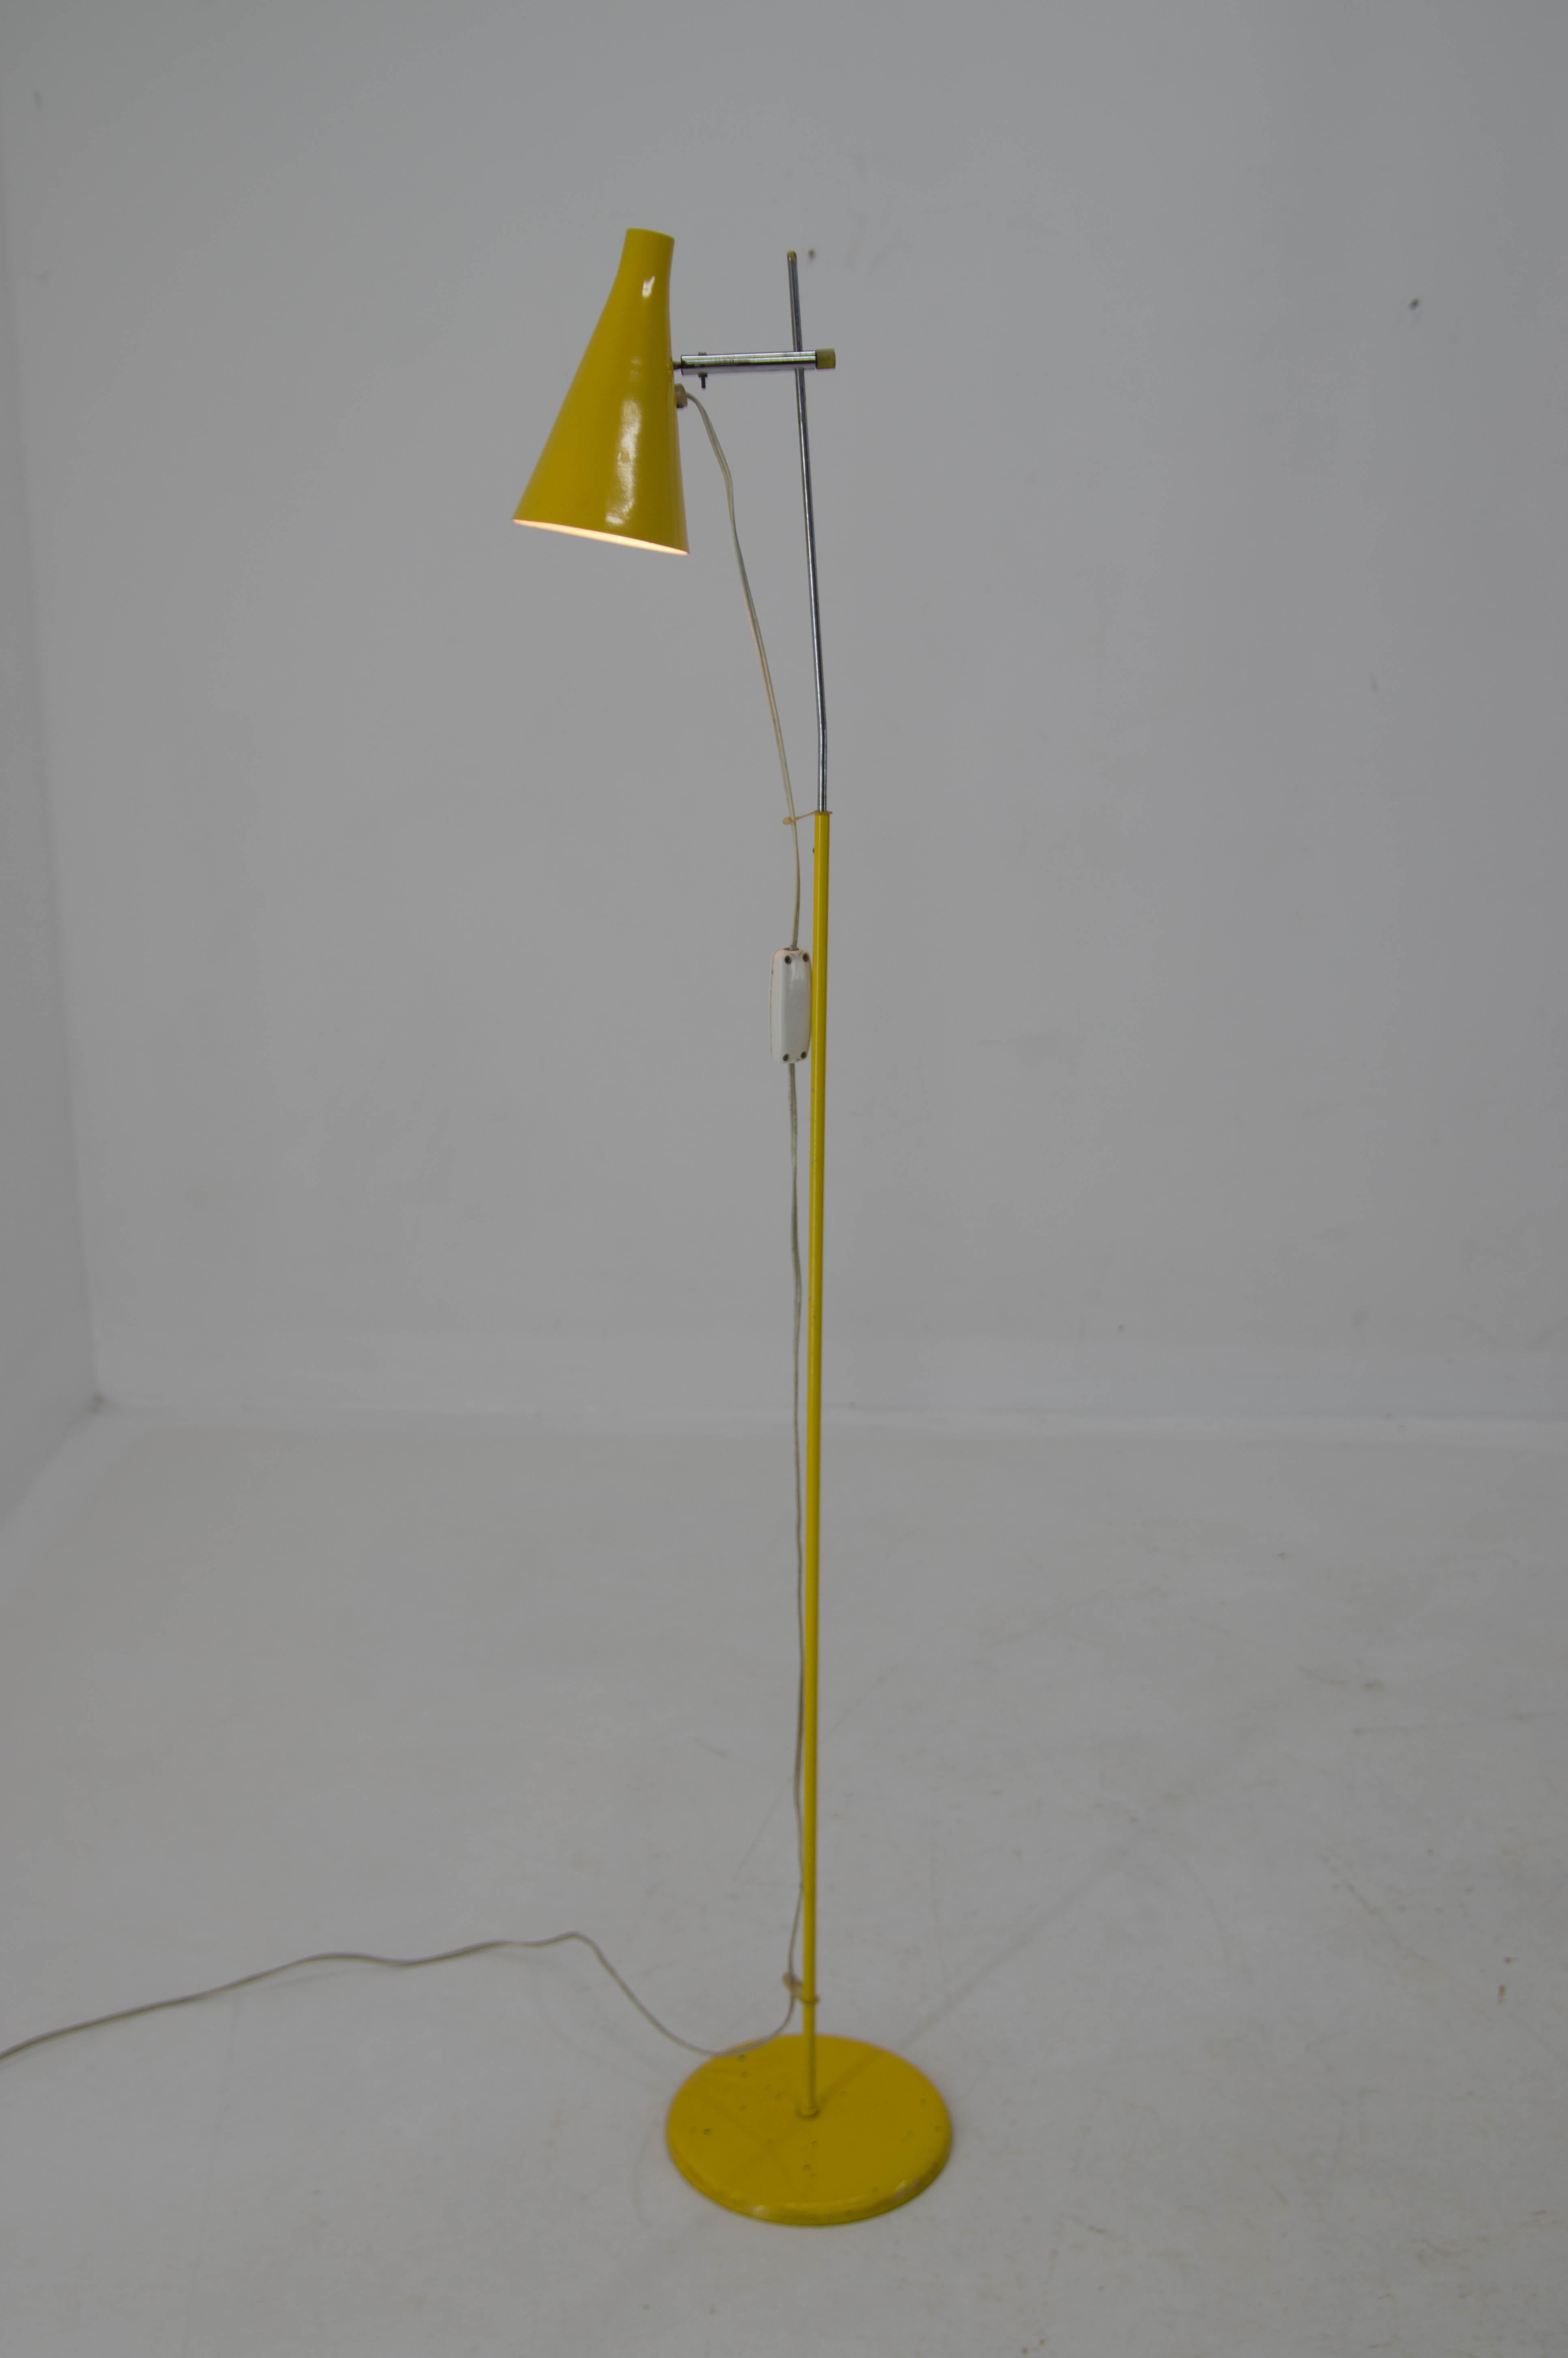 Rare type of floor lamp designed by Josef Hurka for Lidokov.
Flexible shade and adjustable height.
Rewired
E25-E27 bulb
US plug adapter included.